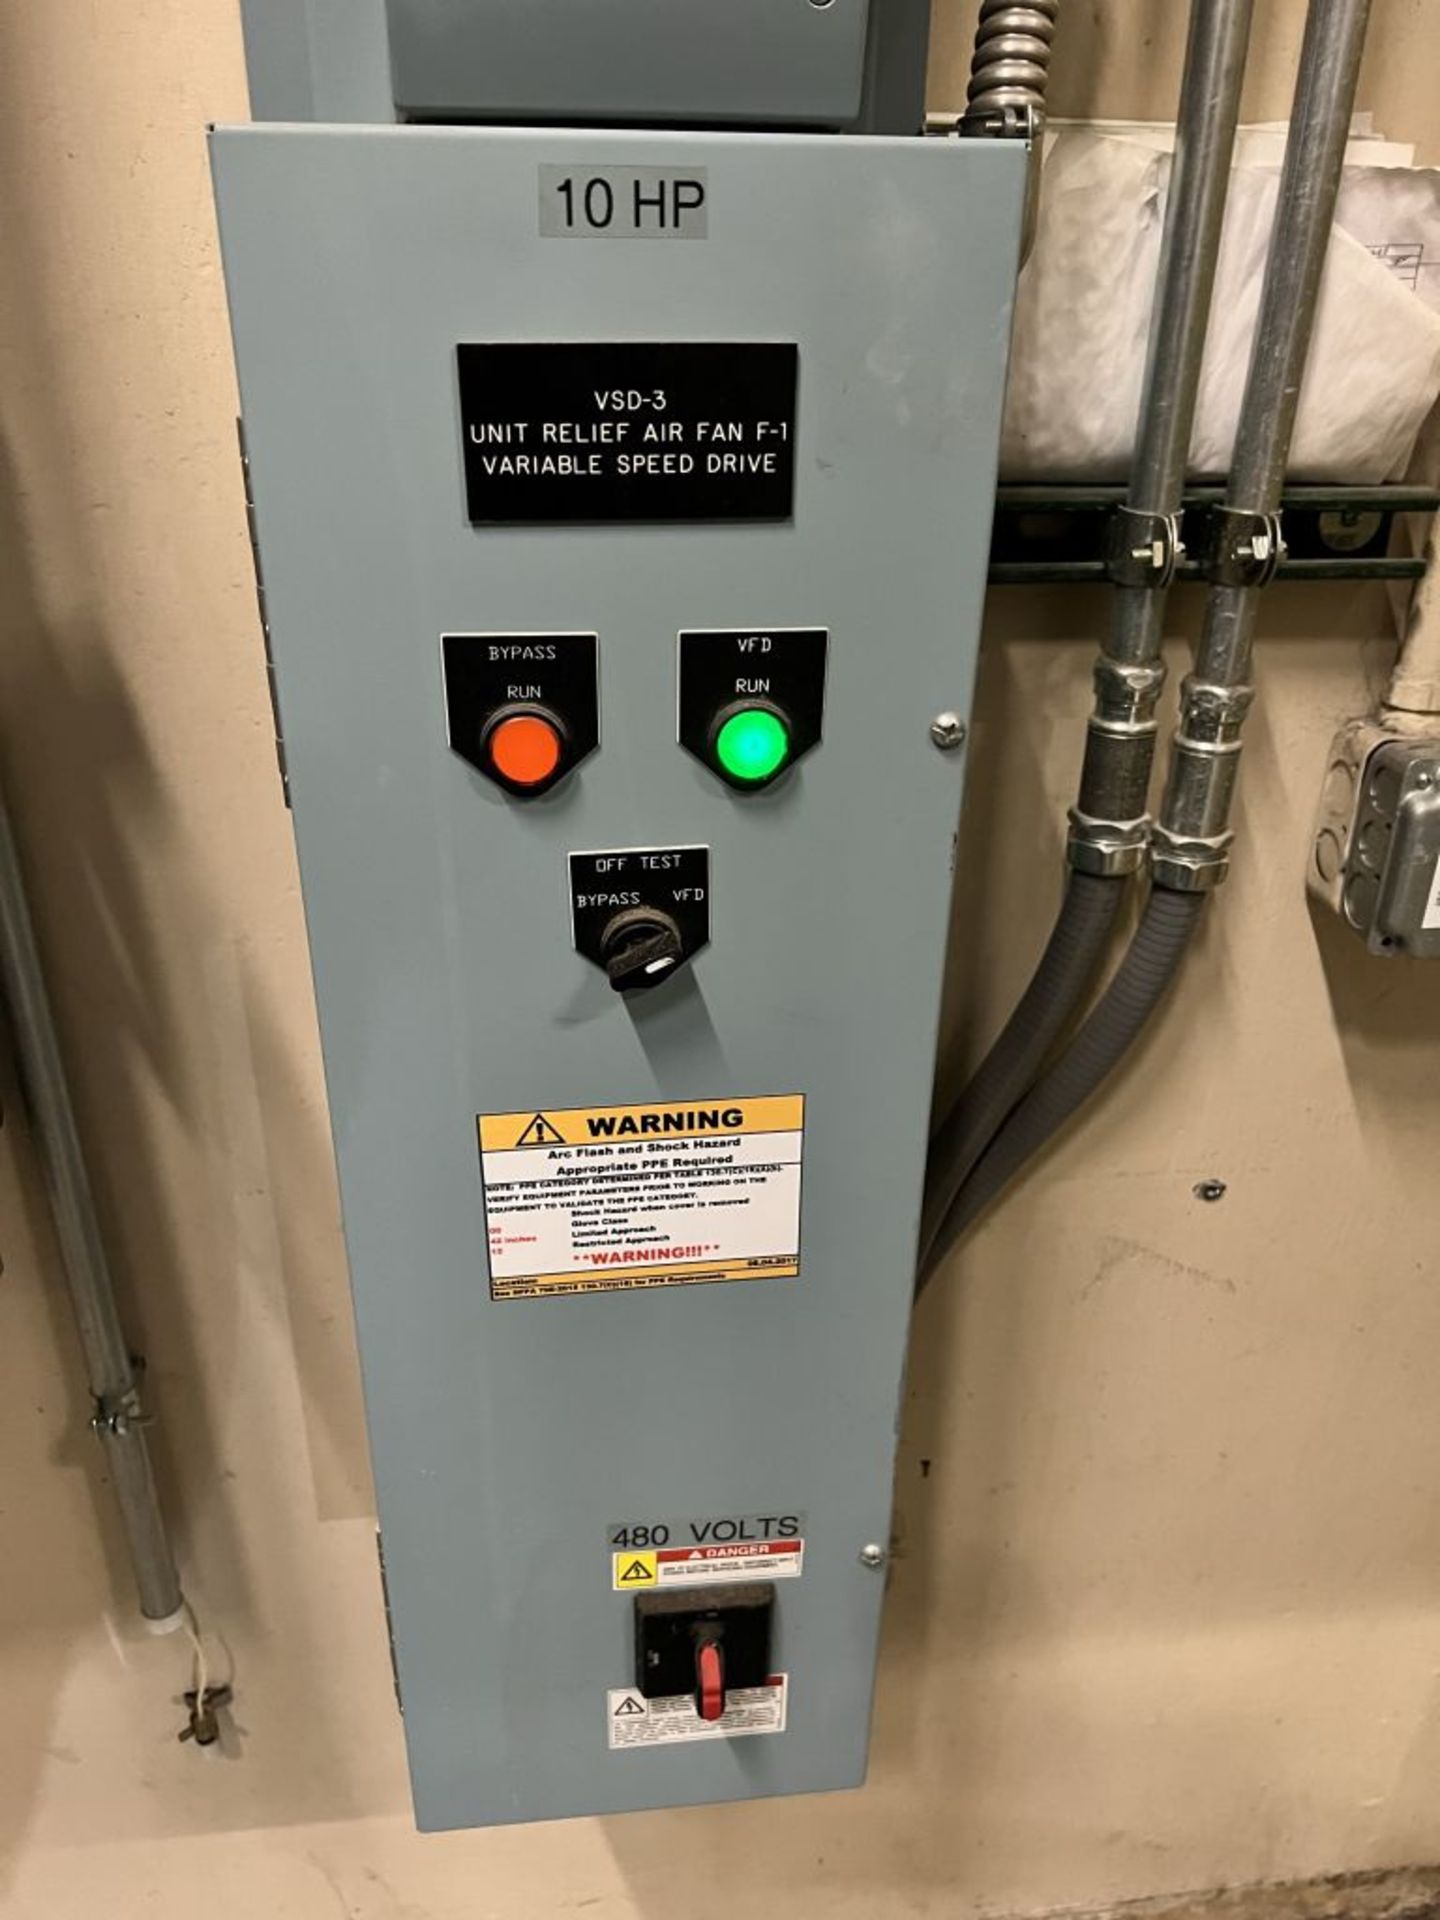 Spartanburg, SC - Honeywell Variable Speed Drive - Image 3 of 3